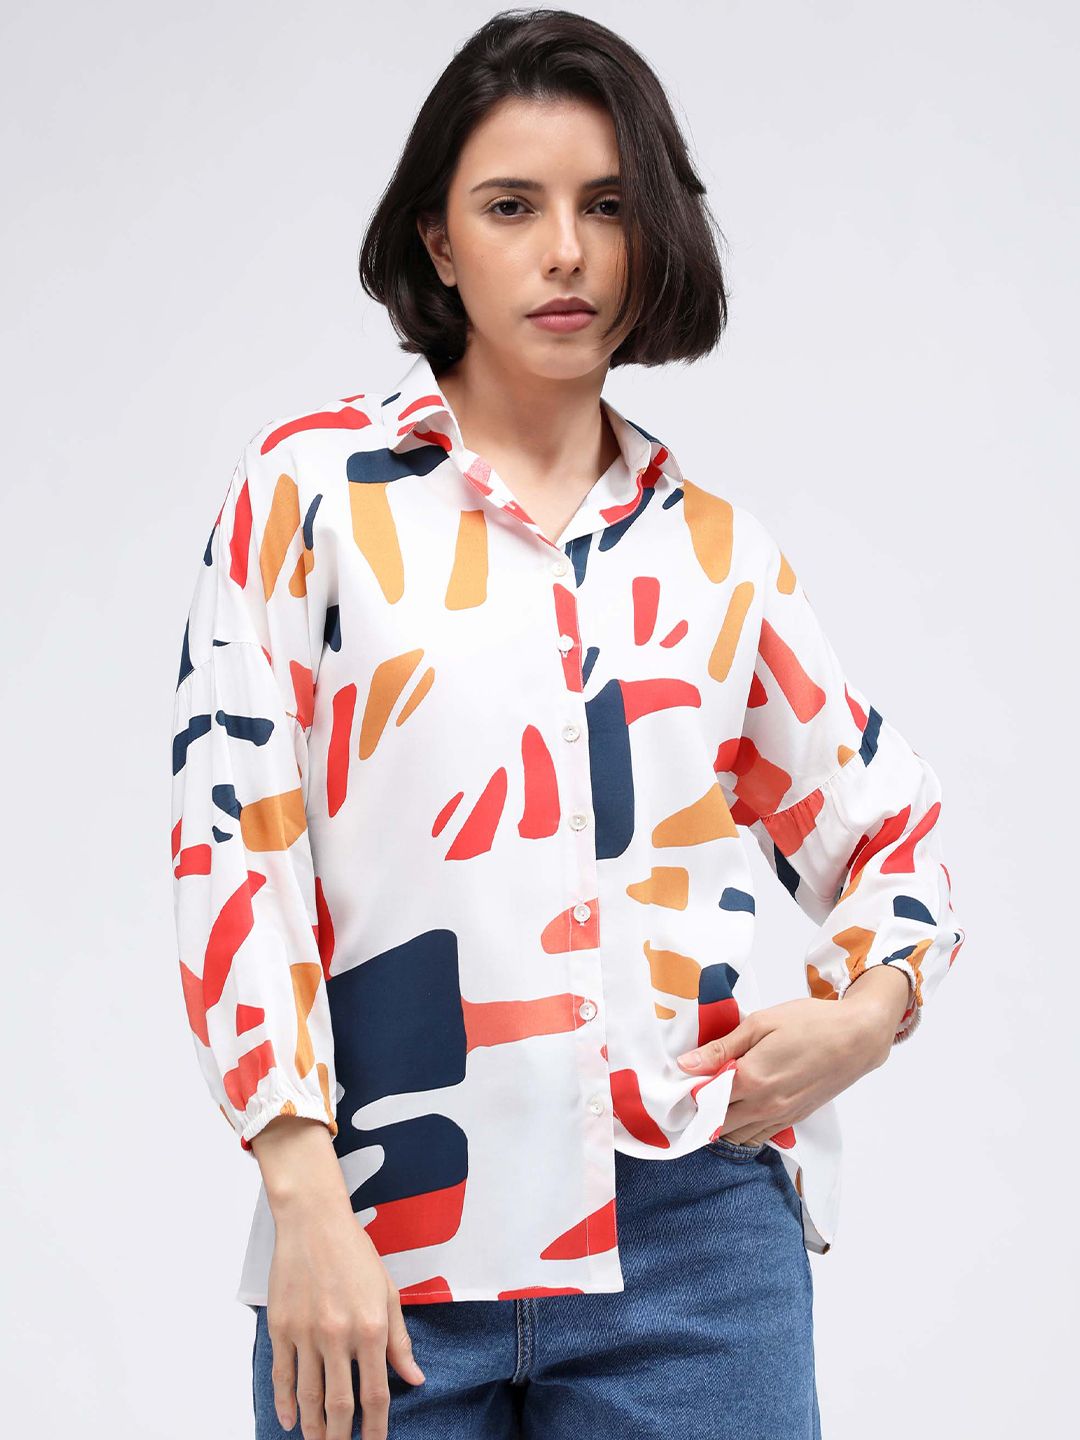 IDK Abstract Printed Shirt Style Top Price in India